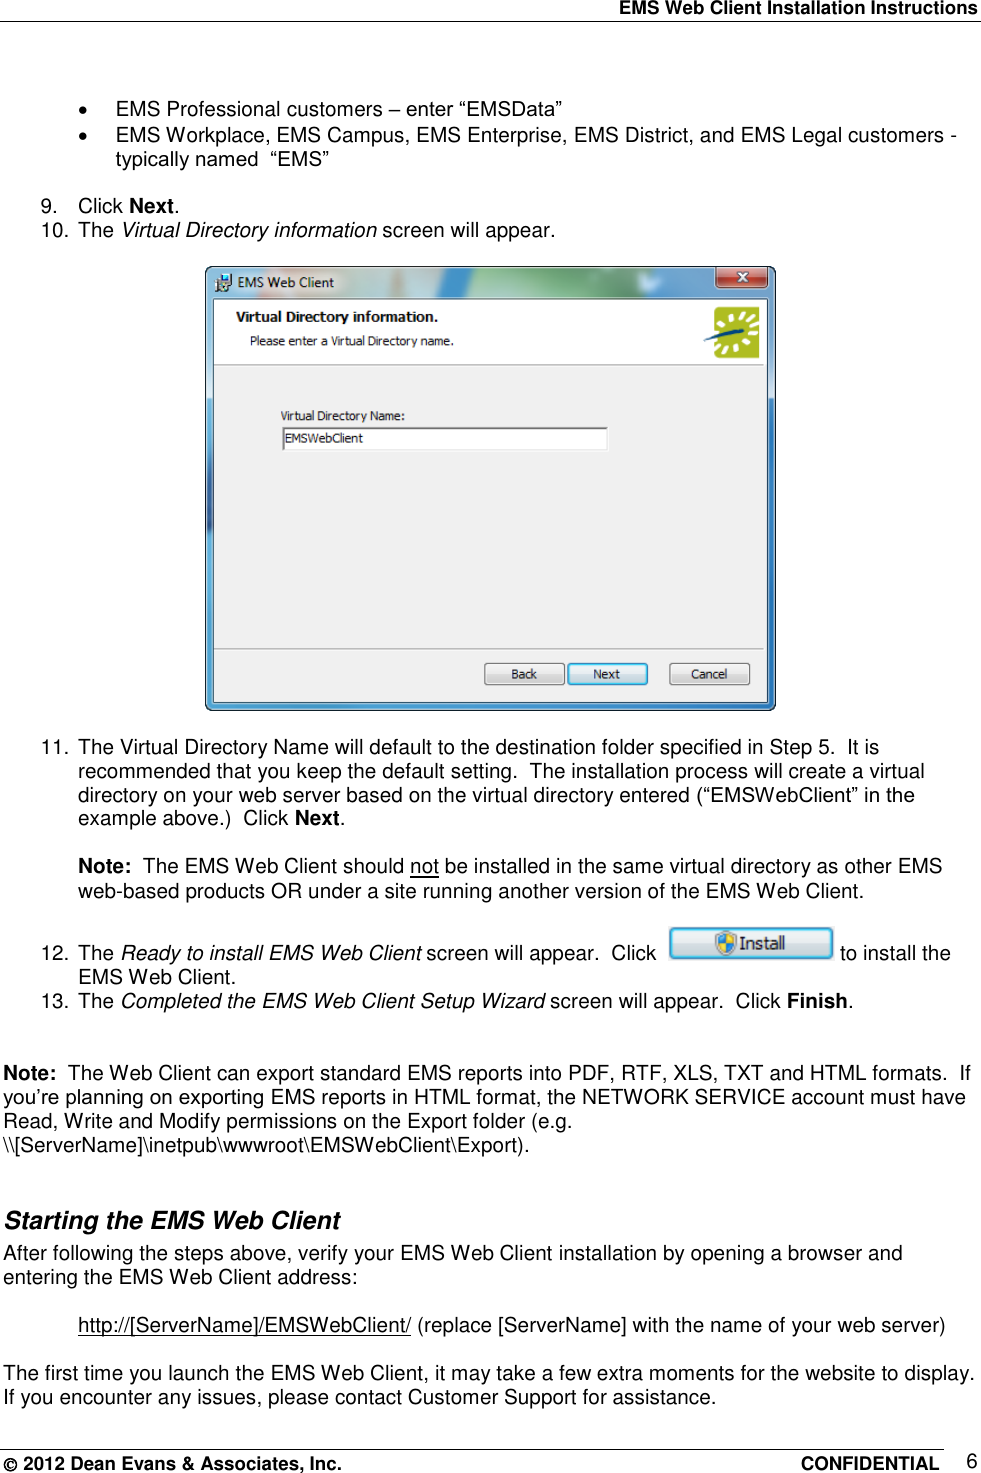 Page 6 of 7 - EMS Web Client Installation Instructions Guide